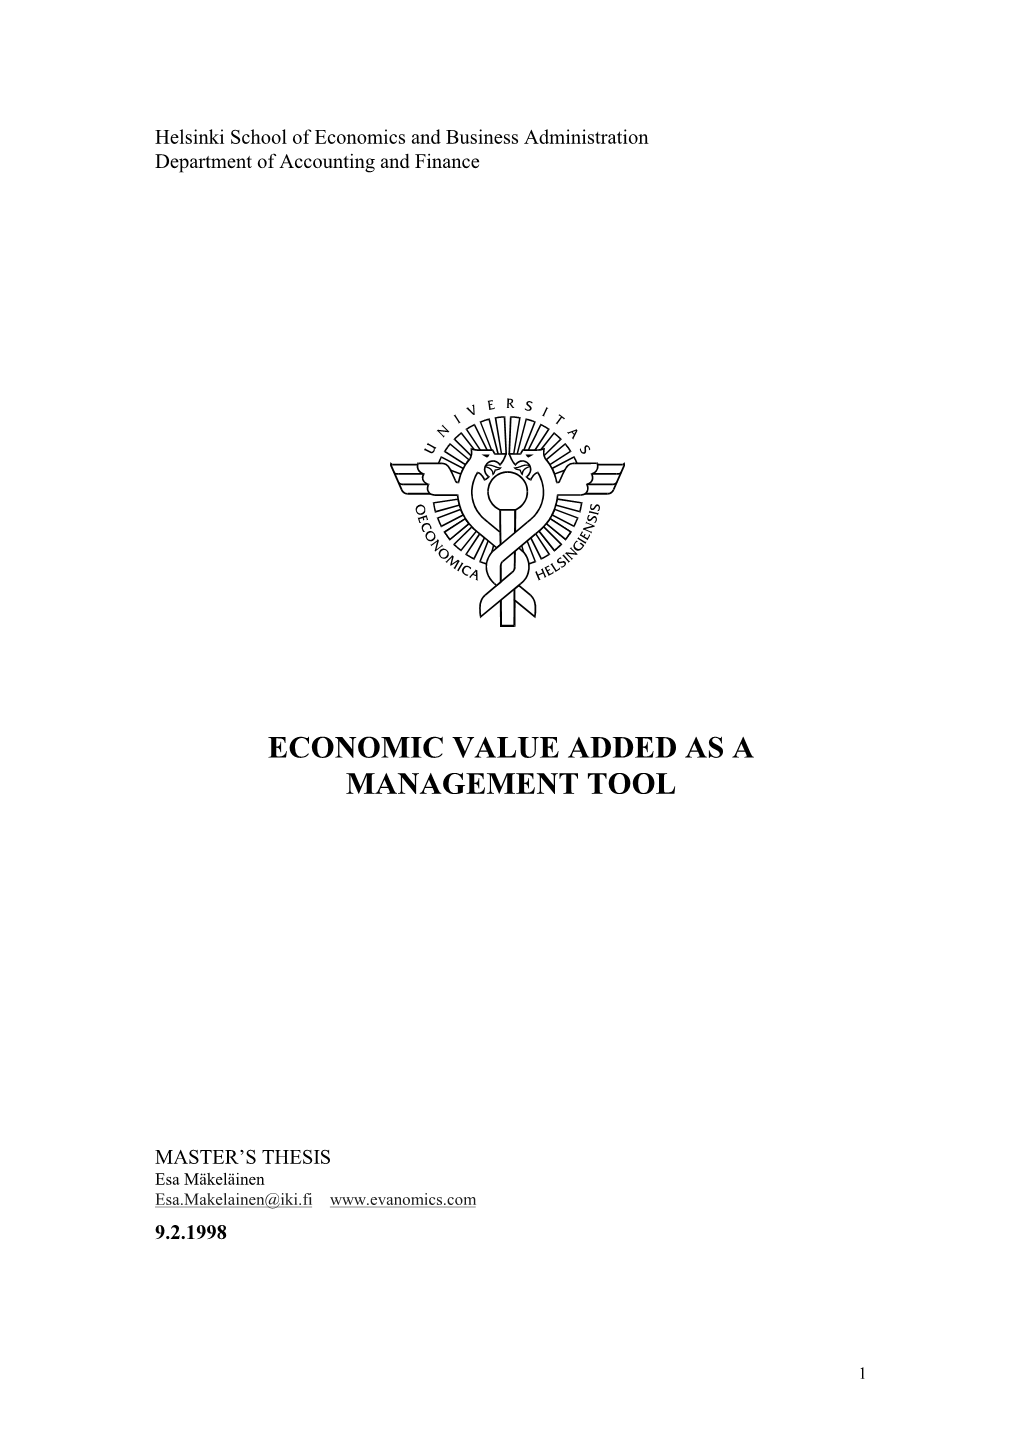 Economic Value Added As a Management Tool